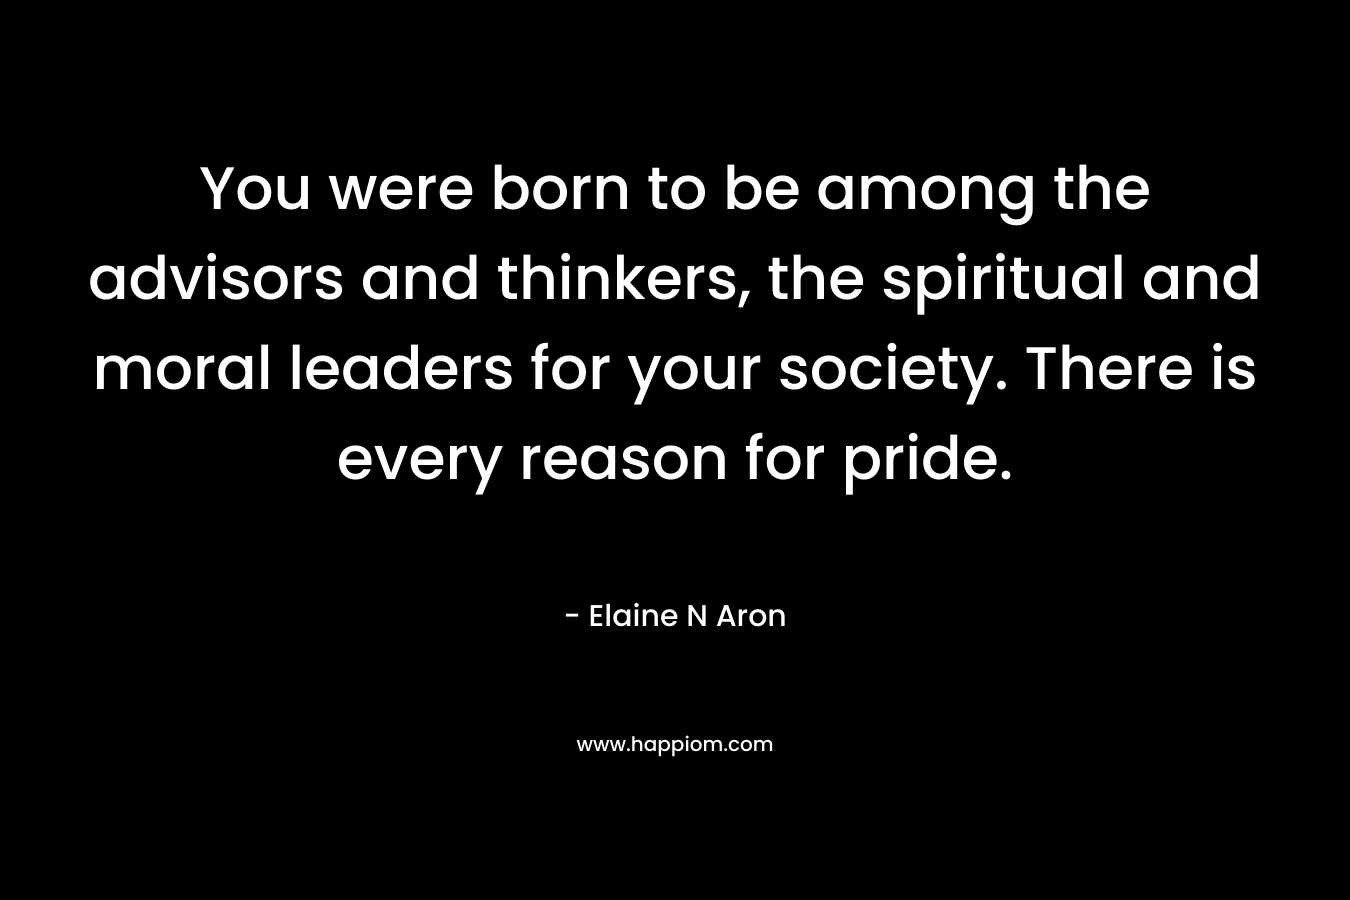 You were born to be among the advisors and thinkers, the spiritual and moral leaders for your society. There is every reason for pride. – Elaine N Aron